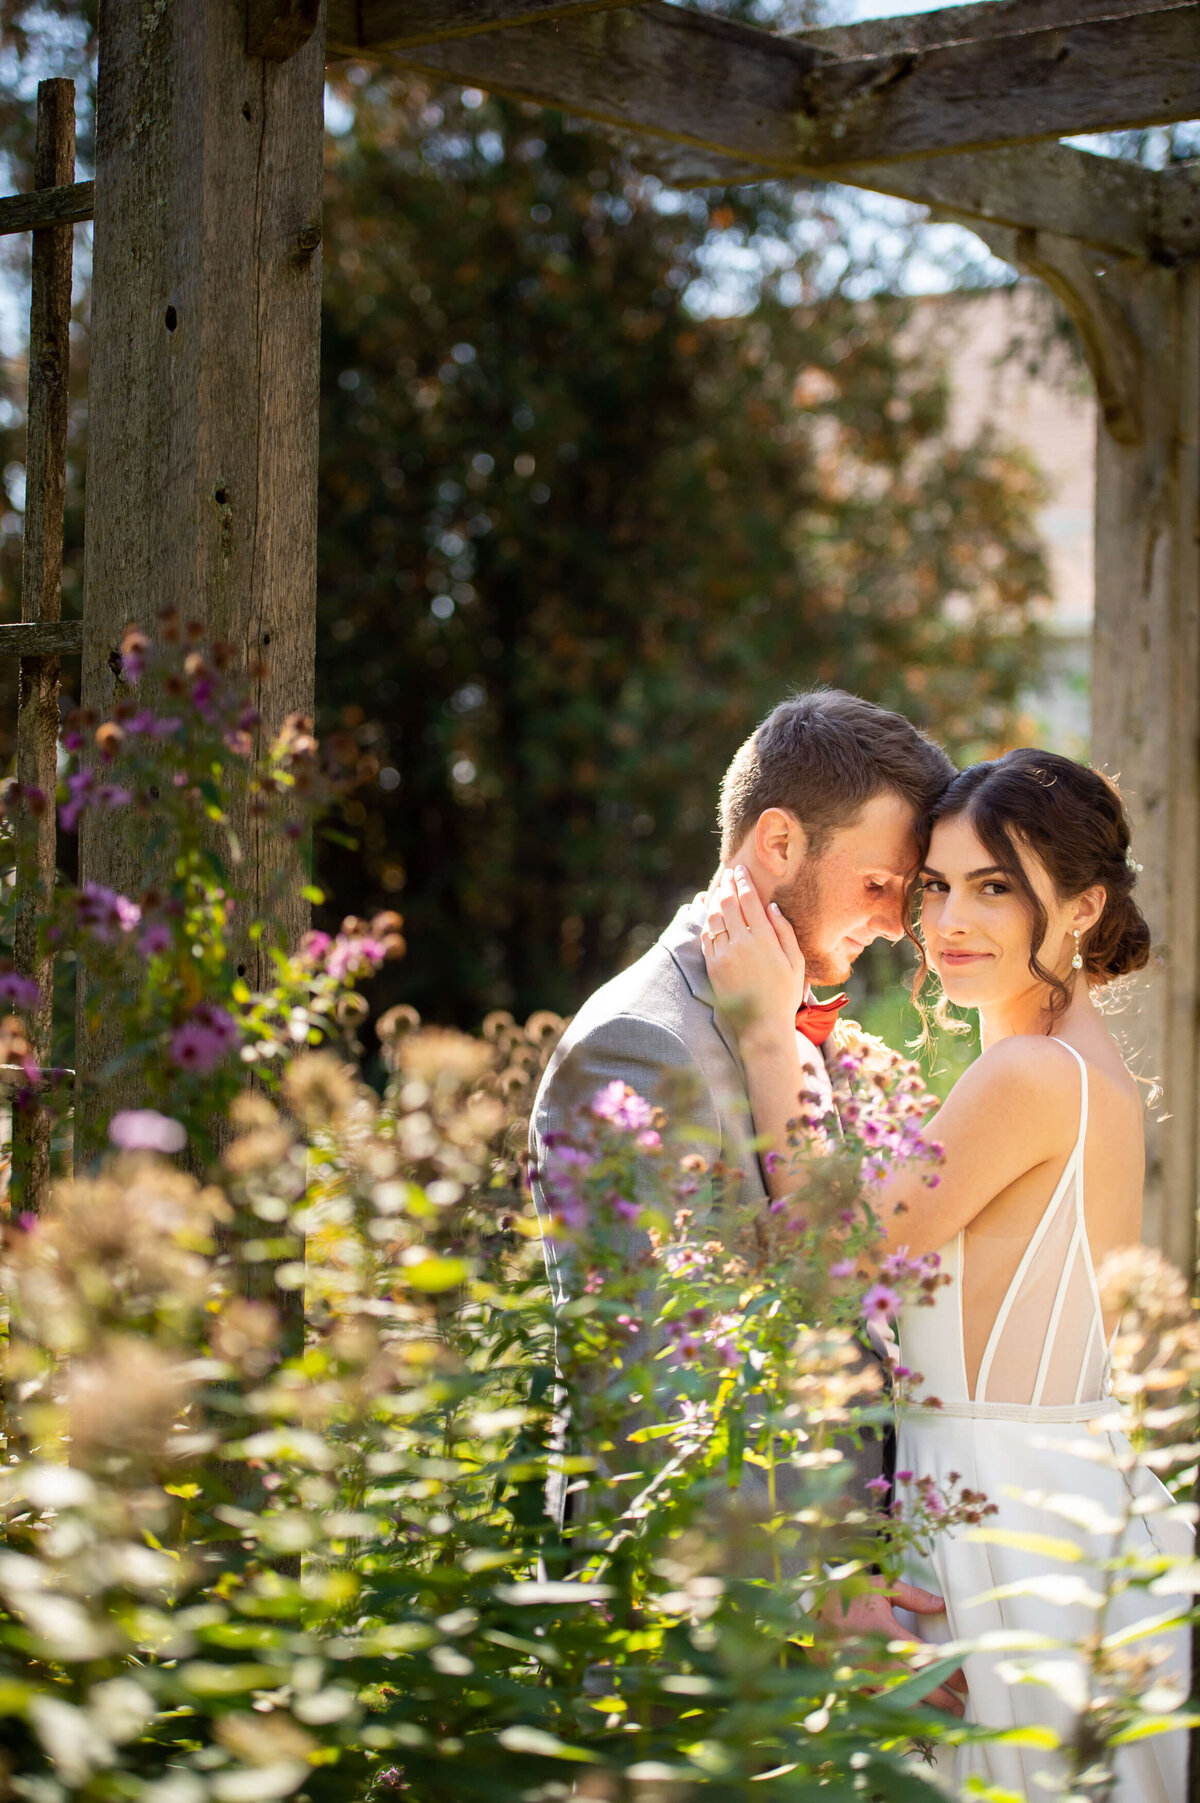 garden portraits of a bride and groom at Strathmere wedding venue in Ottawa